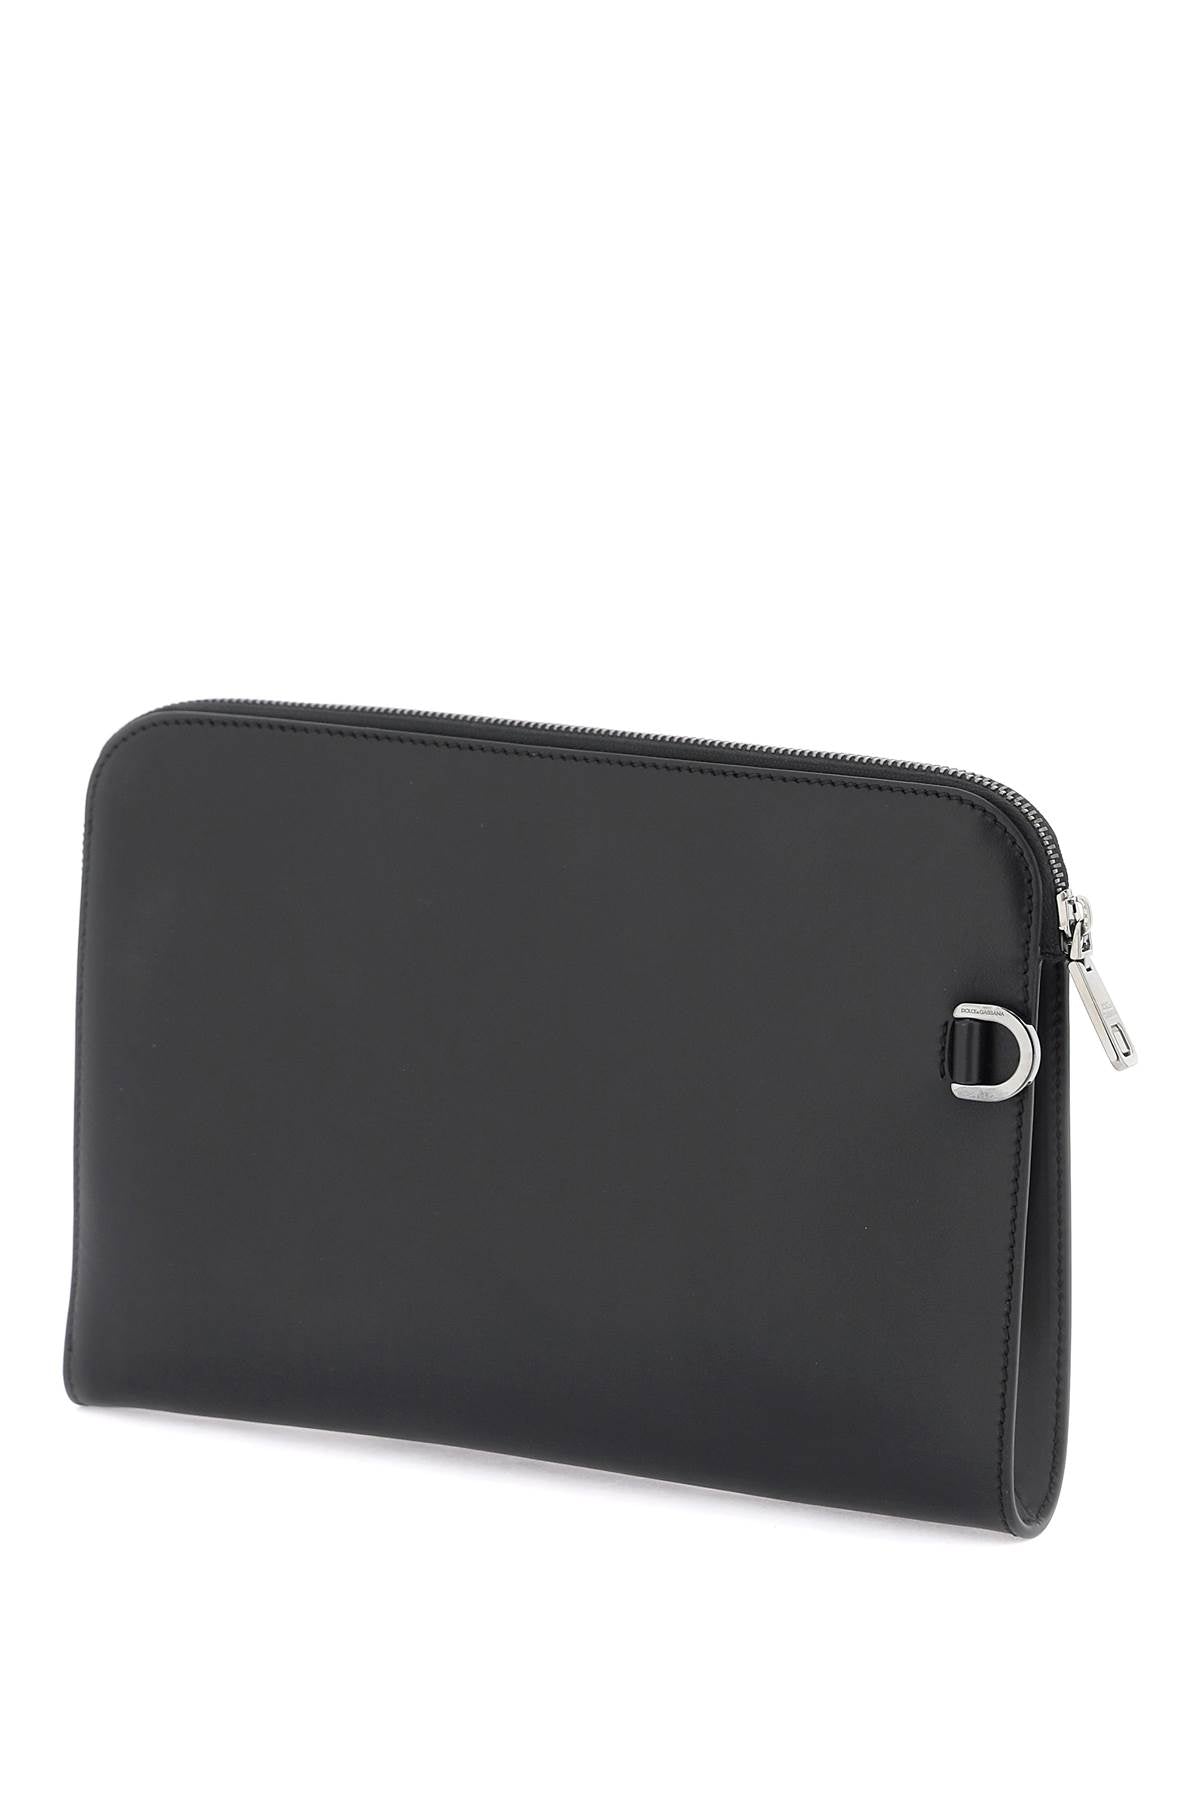 Dolce & gabbana pouch with embossed logo-1